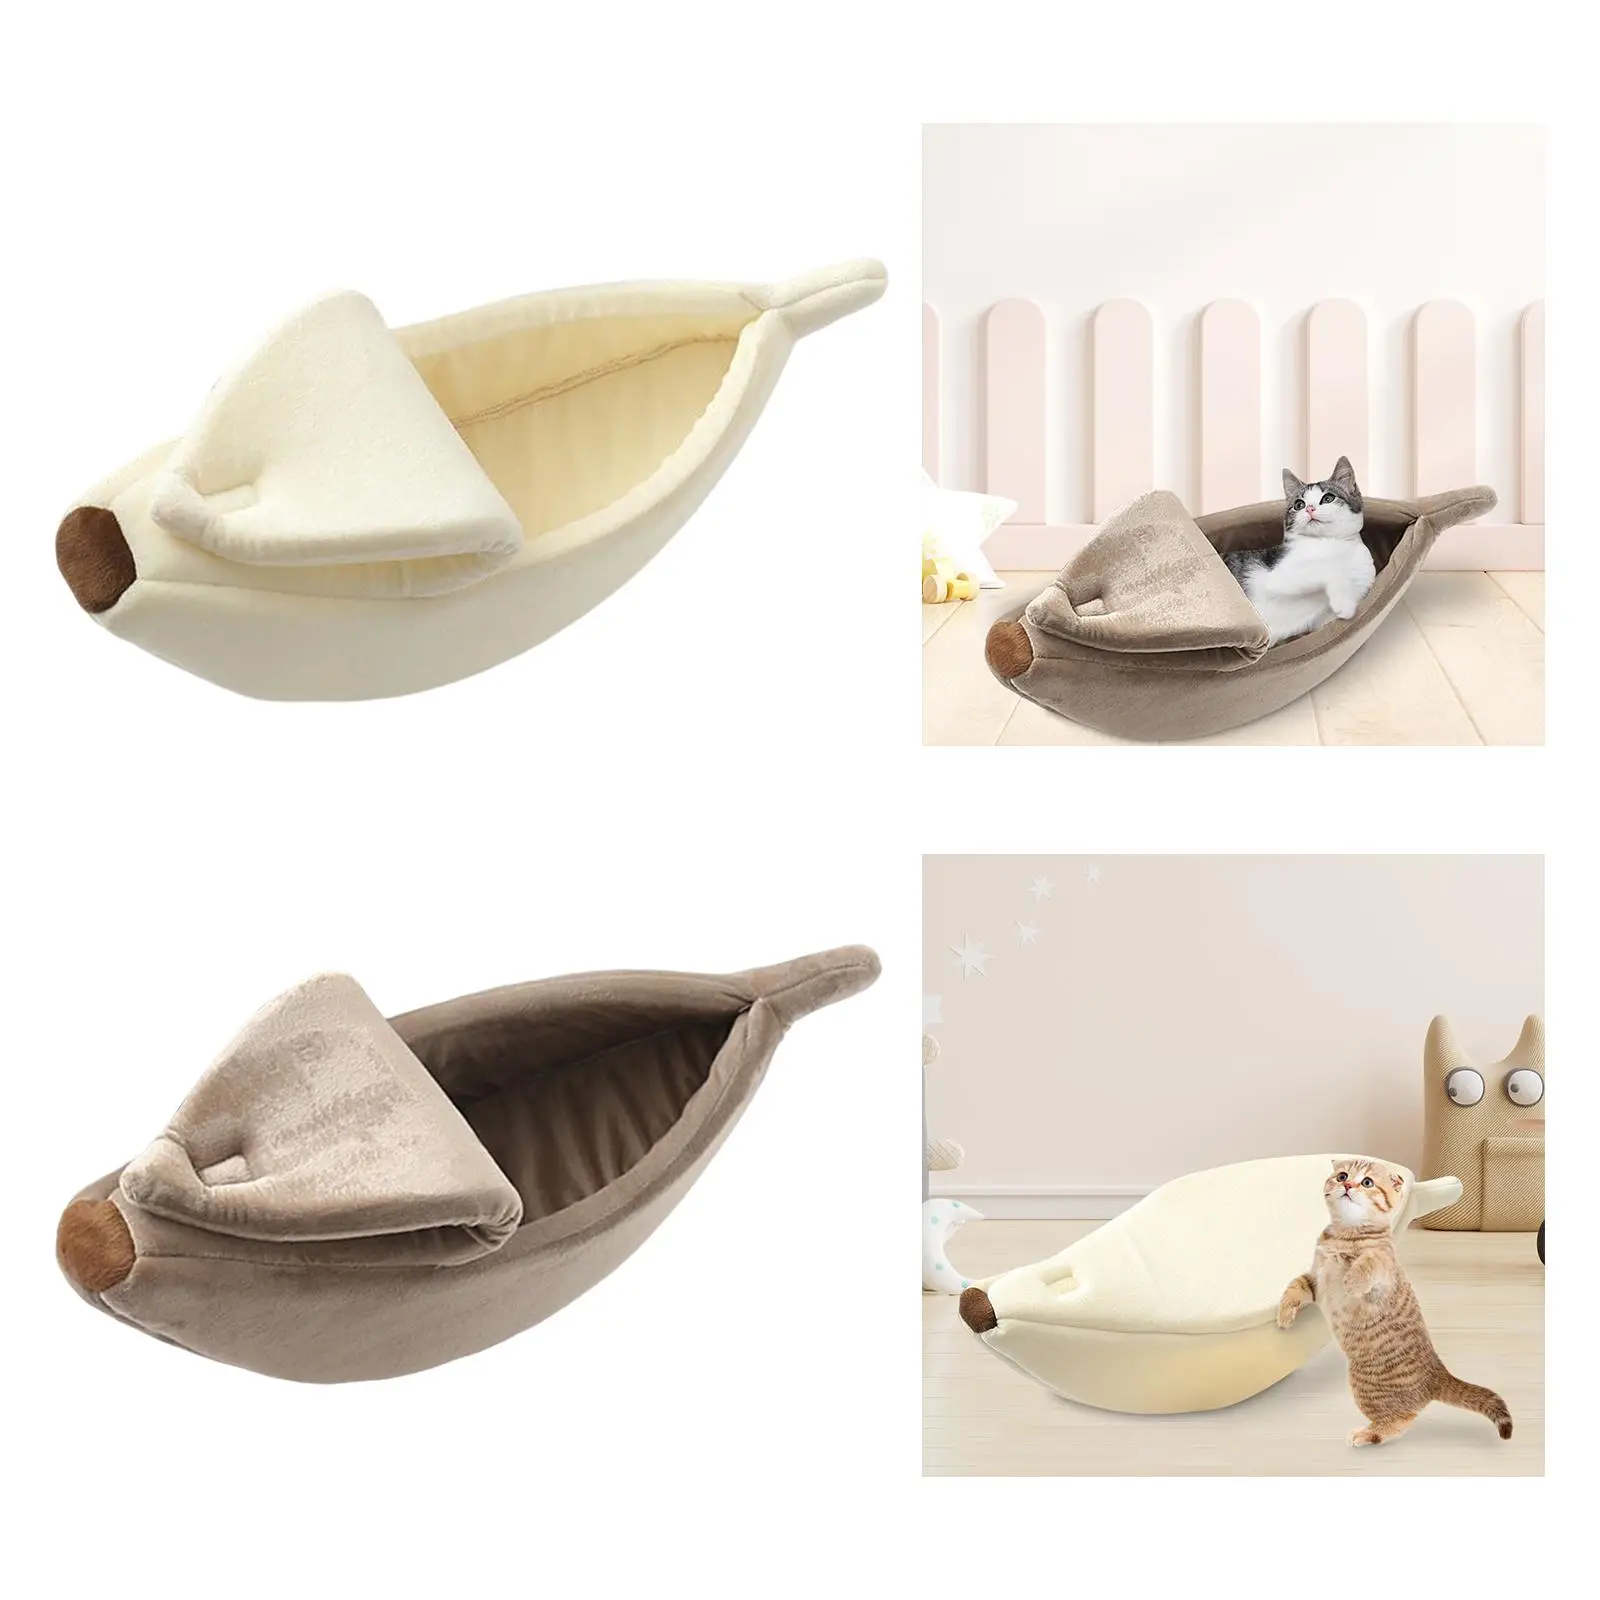 Pet Cat Bed House Cute Banana, Warm Soft Dogs Sofa Sleeping Playing Resting Bed, Lovely Pet Supplies